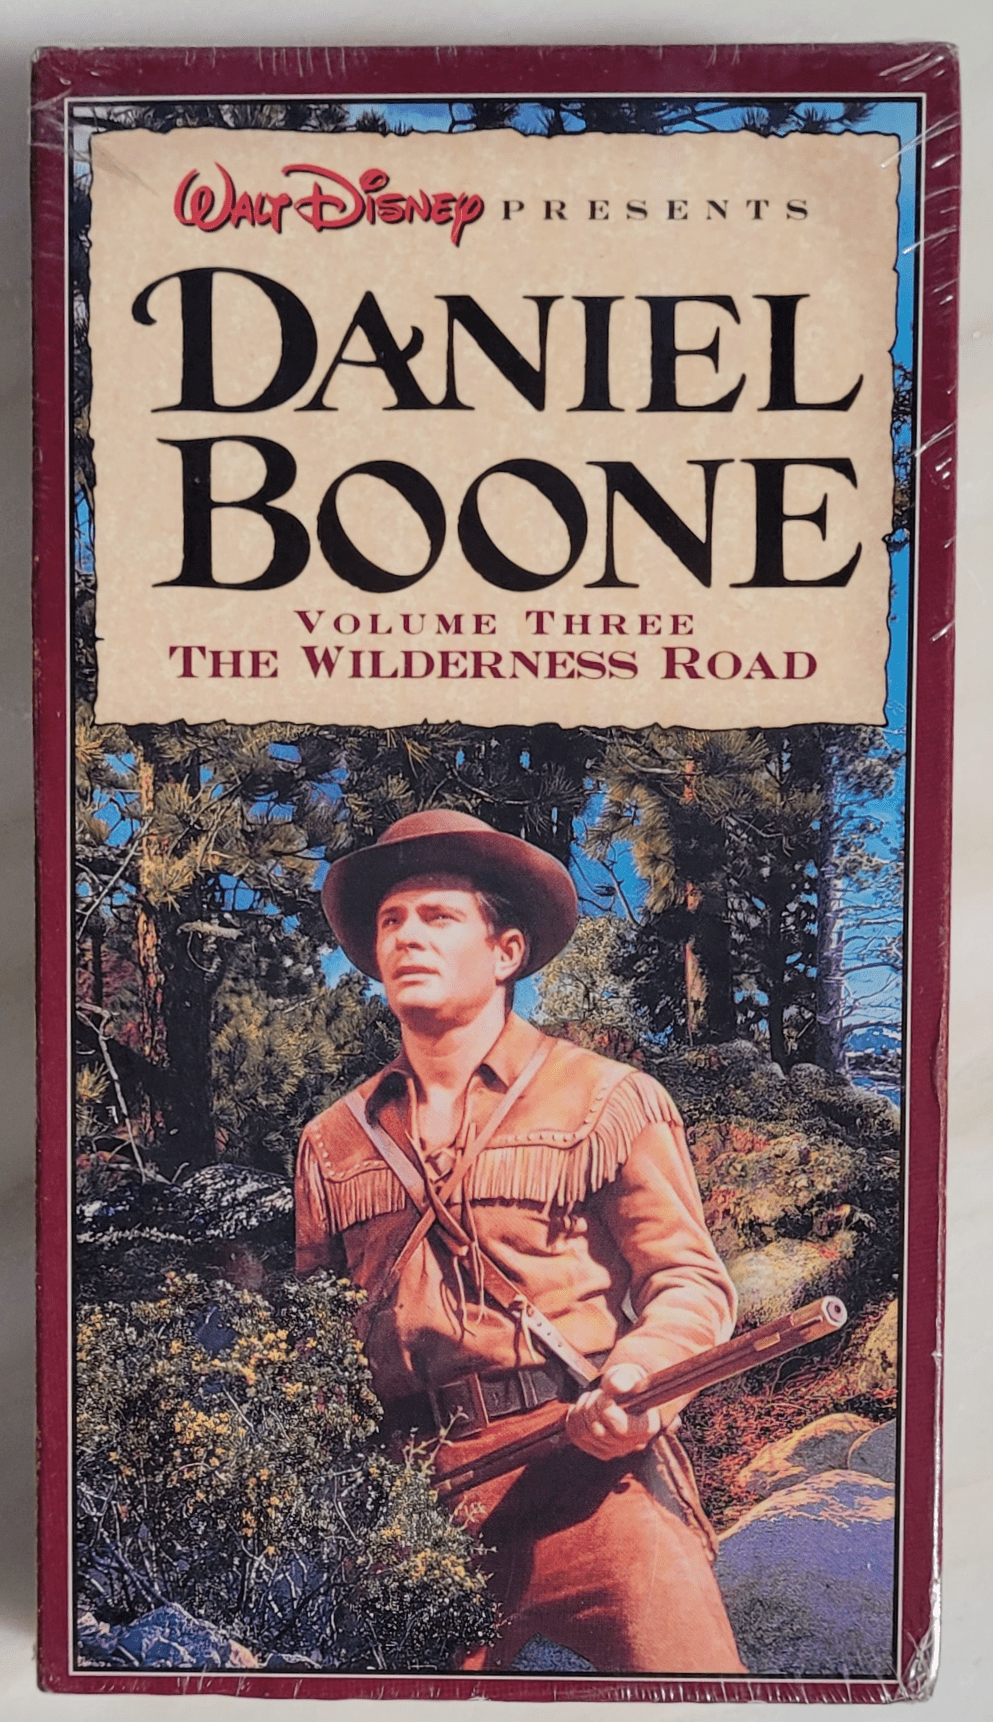 Daniel Boone Volume Three The Wilderness Road VHS - Front View